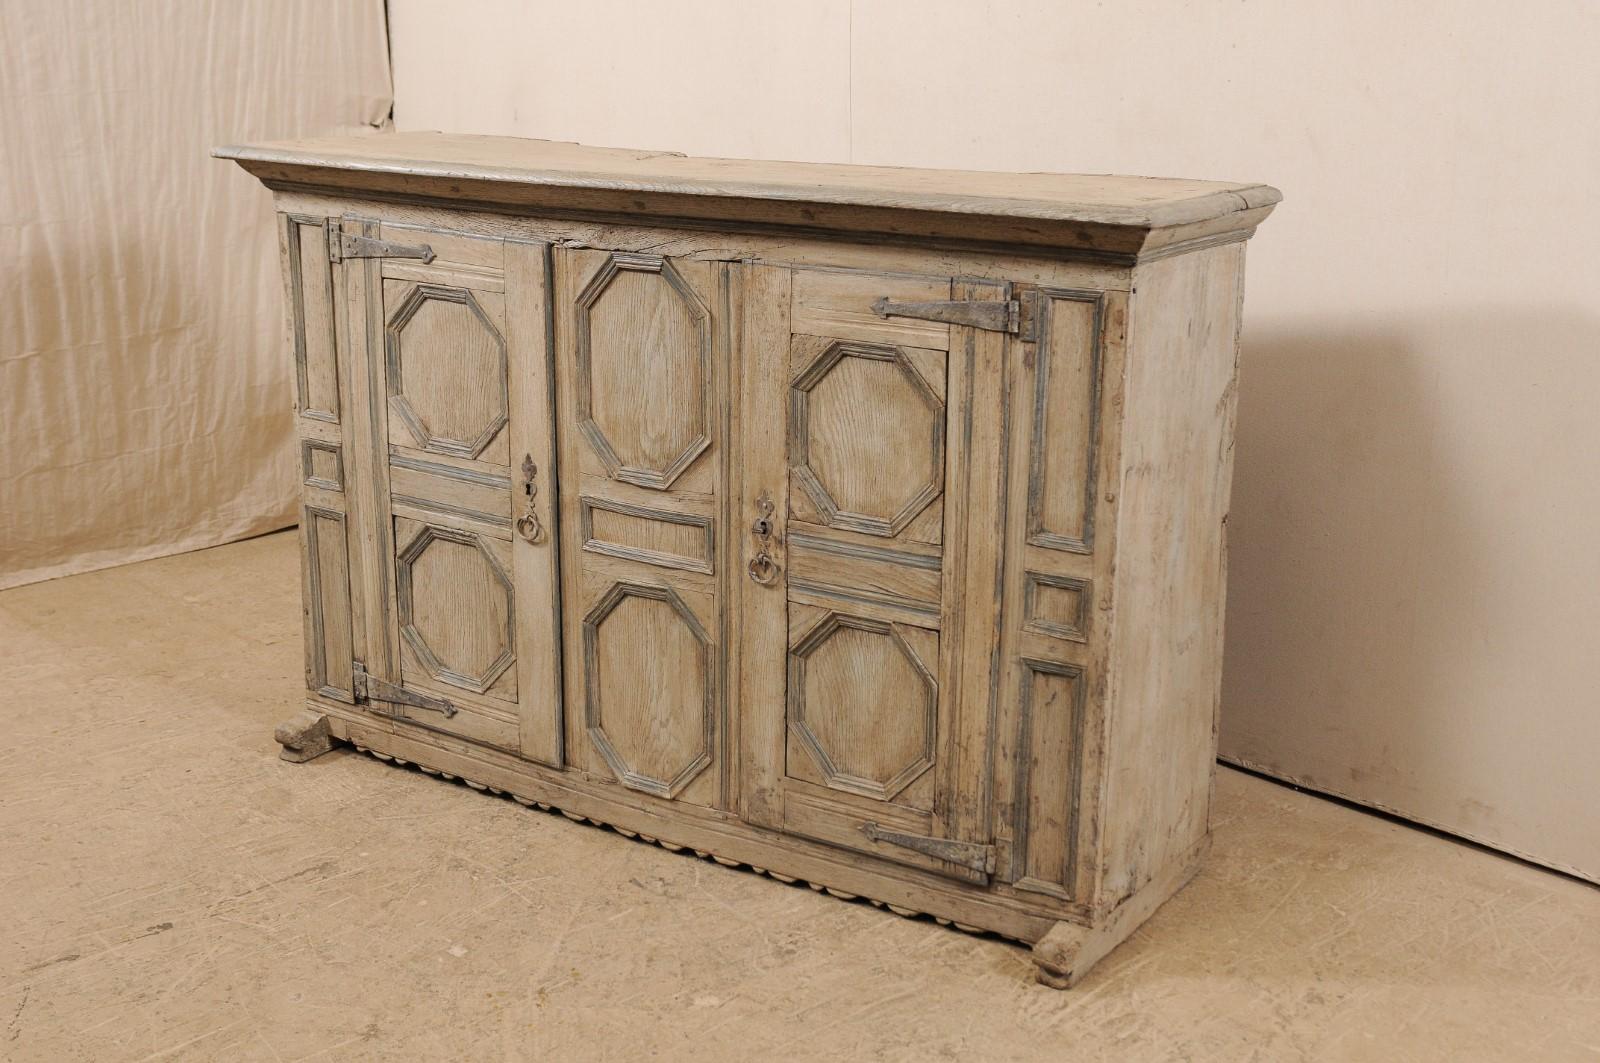 18th Century German Carved and Painted Wood Sideboard Cabinet (Geschnitzt)